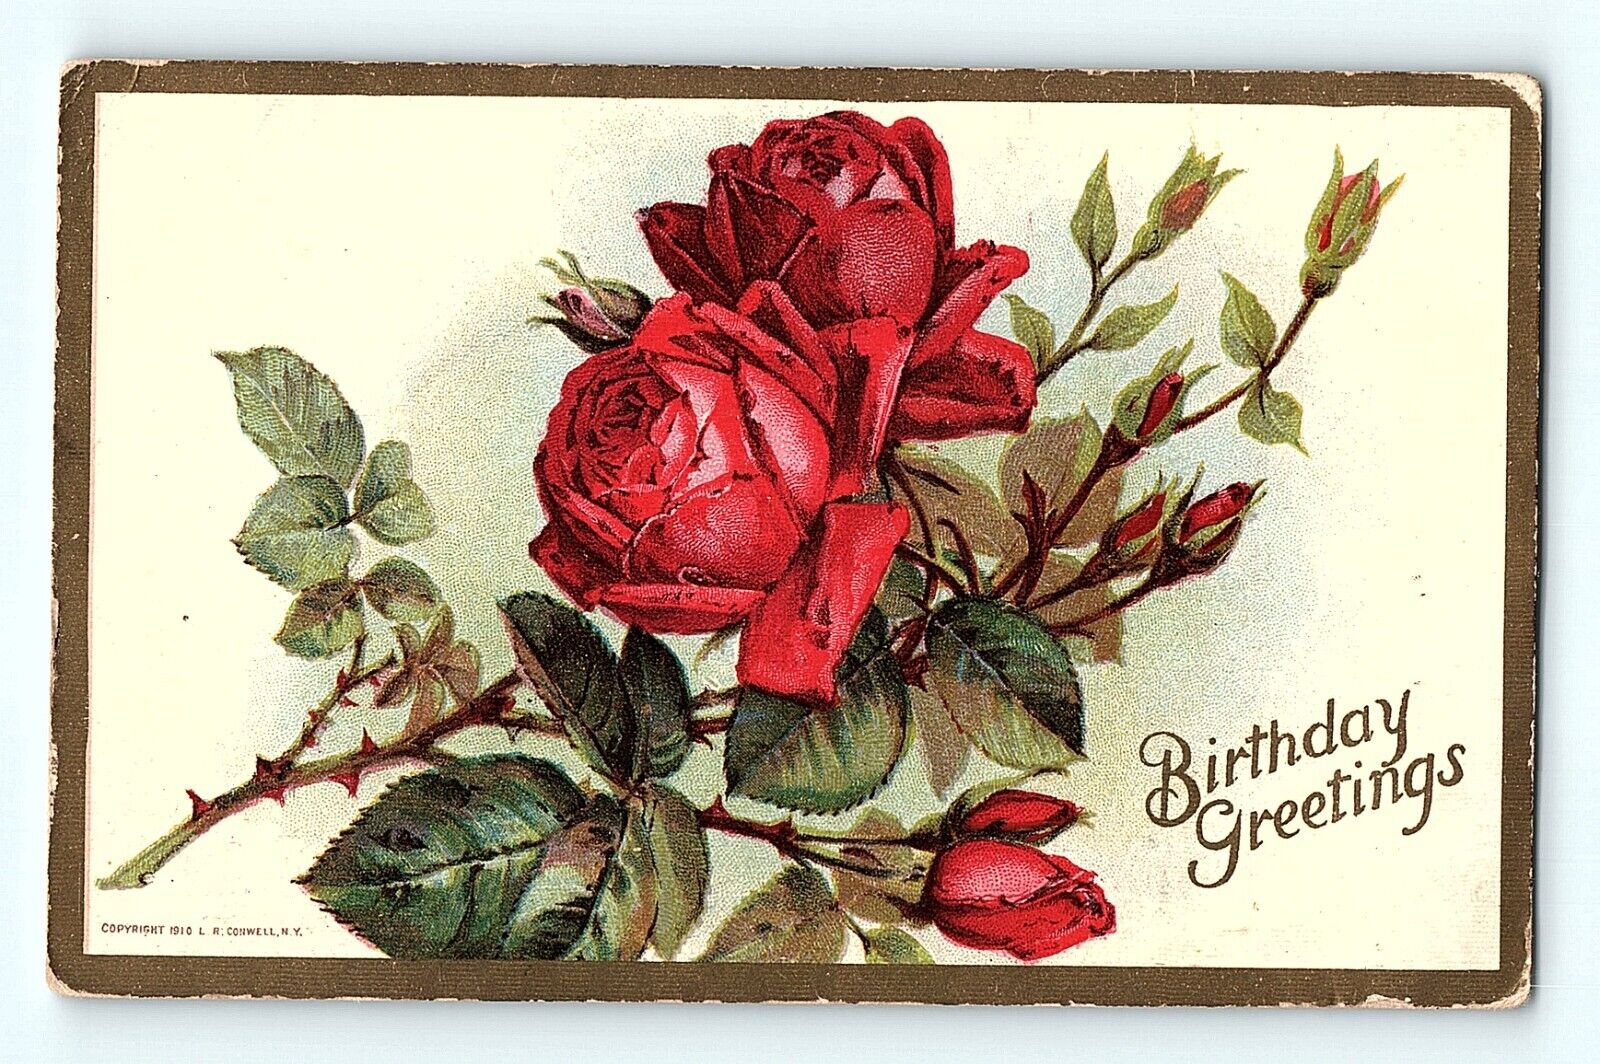 Birthday Greetings Thorns Natural Red Roses Buds 1910 Conwell Vintag Postcard E5